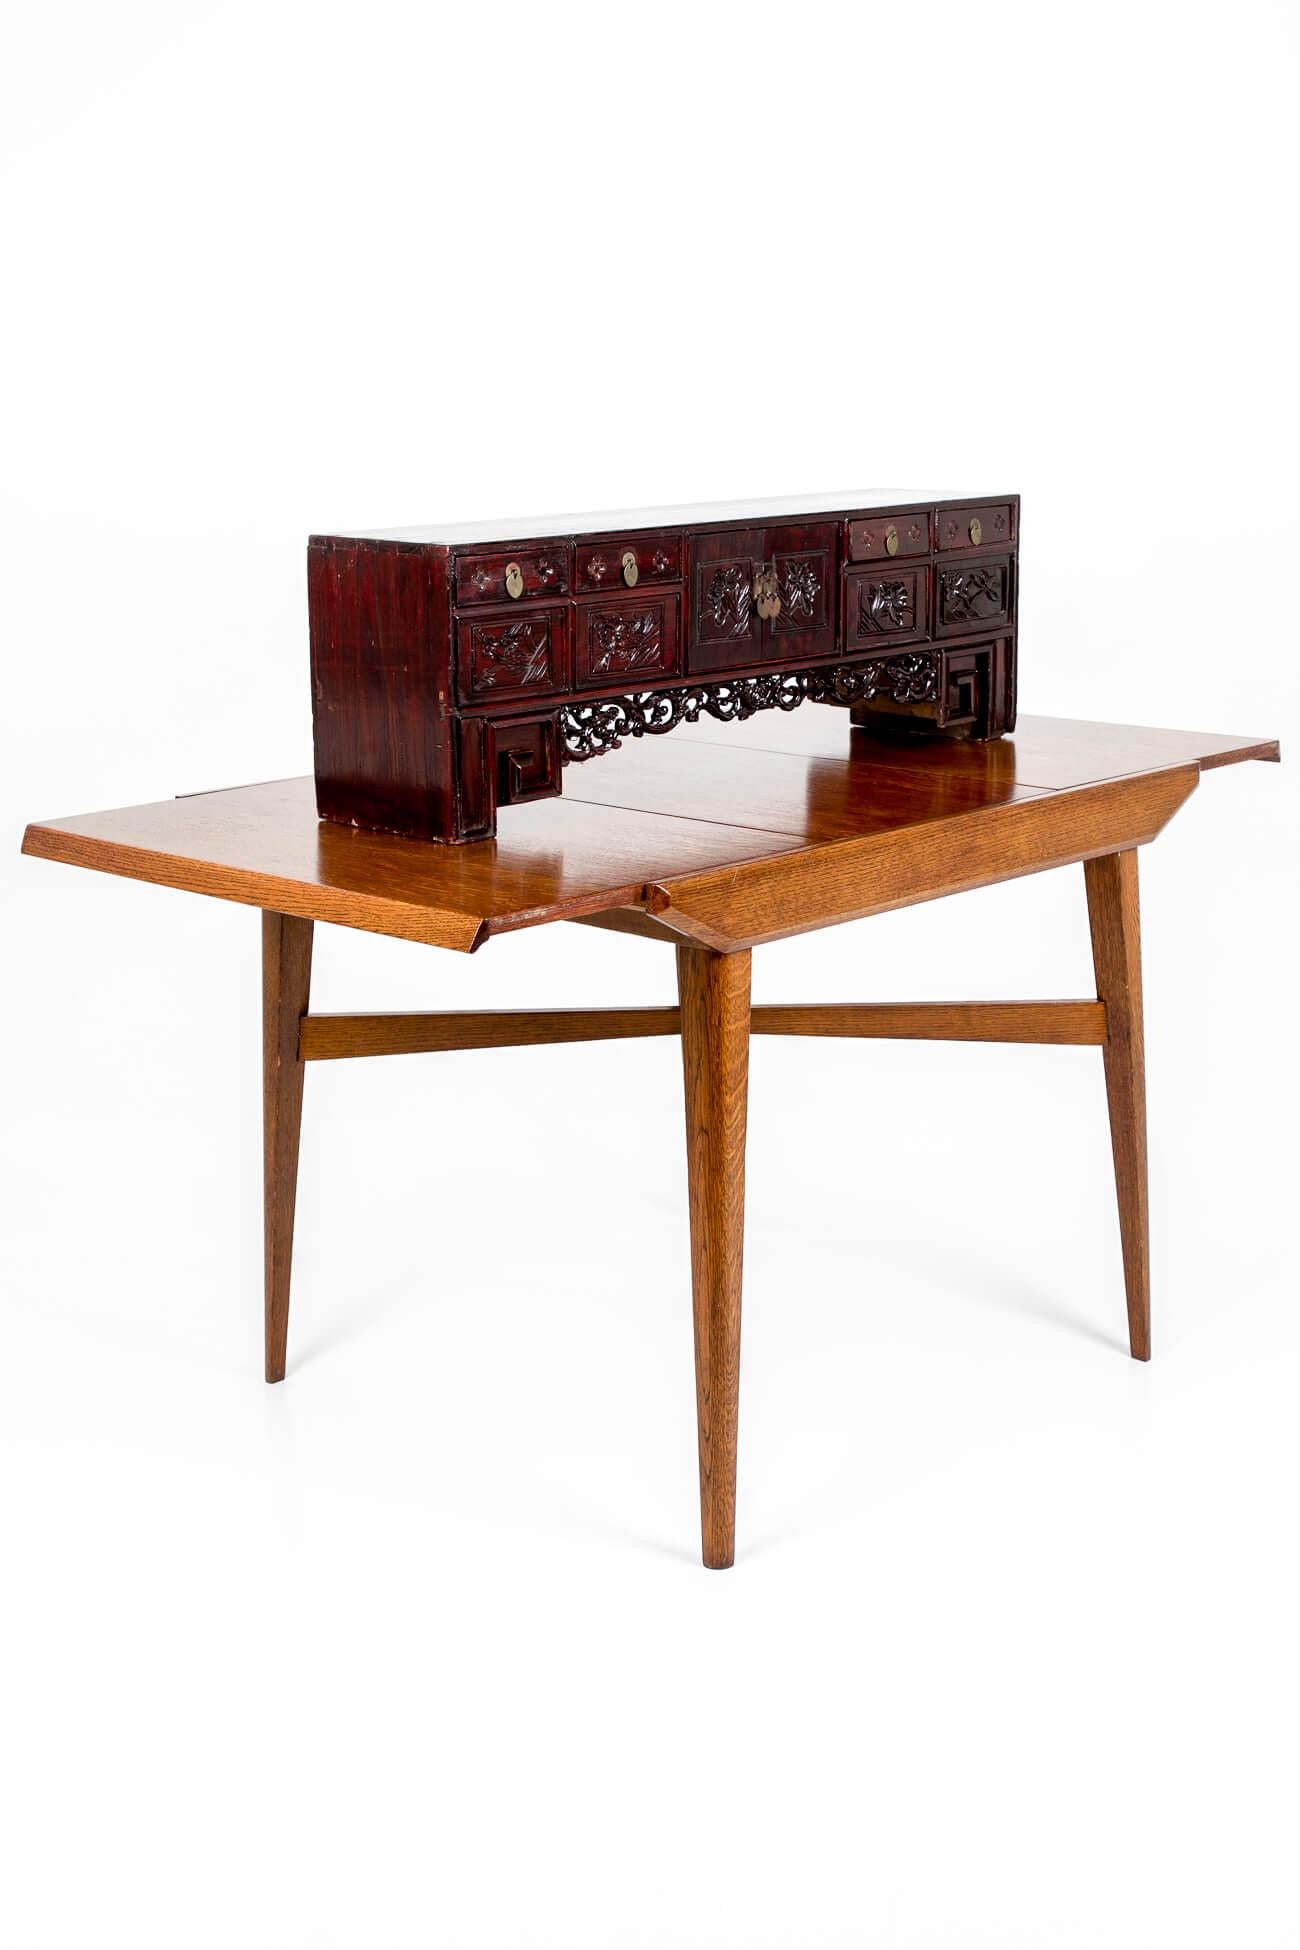 An ebonised burgundy Chinese scholar’s low kang hardwood cabinet. Featuring six small drawers, four across the top above a central cupboard that sits behind two doors and two hidden drawers, one on each side of the cabinet. With flora and fauna